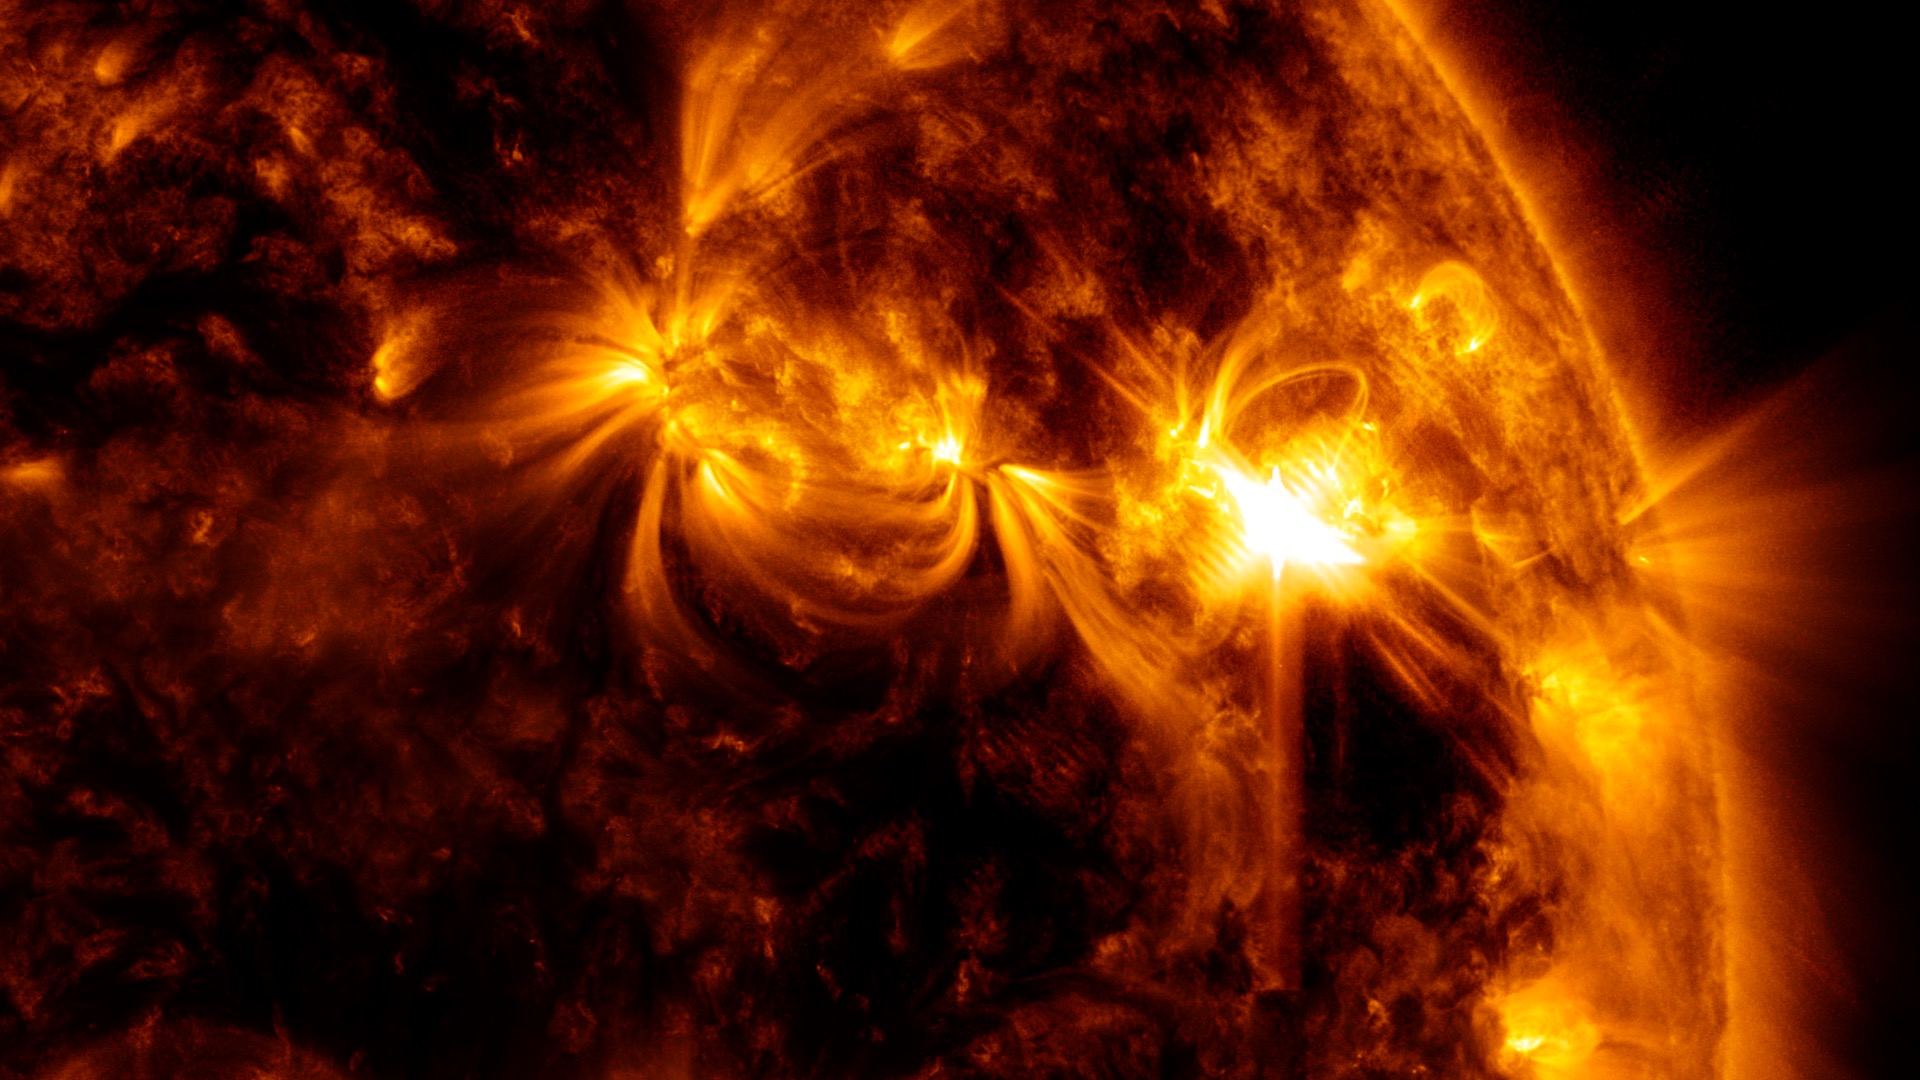 Preview Image for Mid-level Solar Flare Erupts from Sun on March 31, 2022